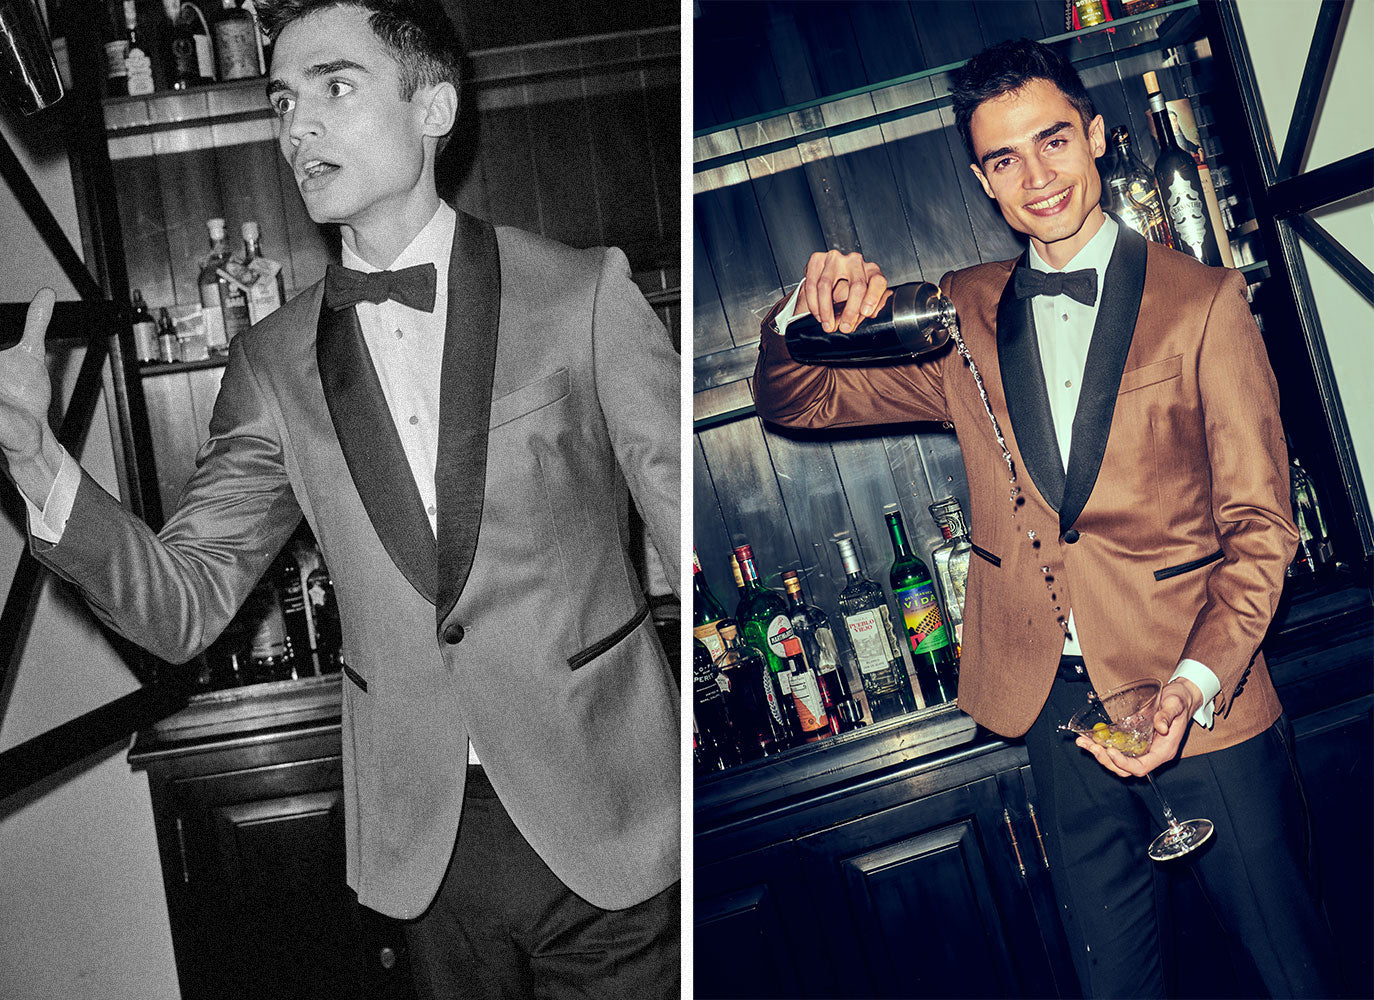 Black and white photo of a model wearing a dinner jacket, tuxedo shirt with dress studs, and bow tie. He is tossing up a cocktail shaker.